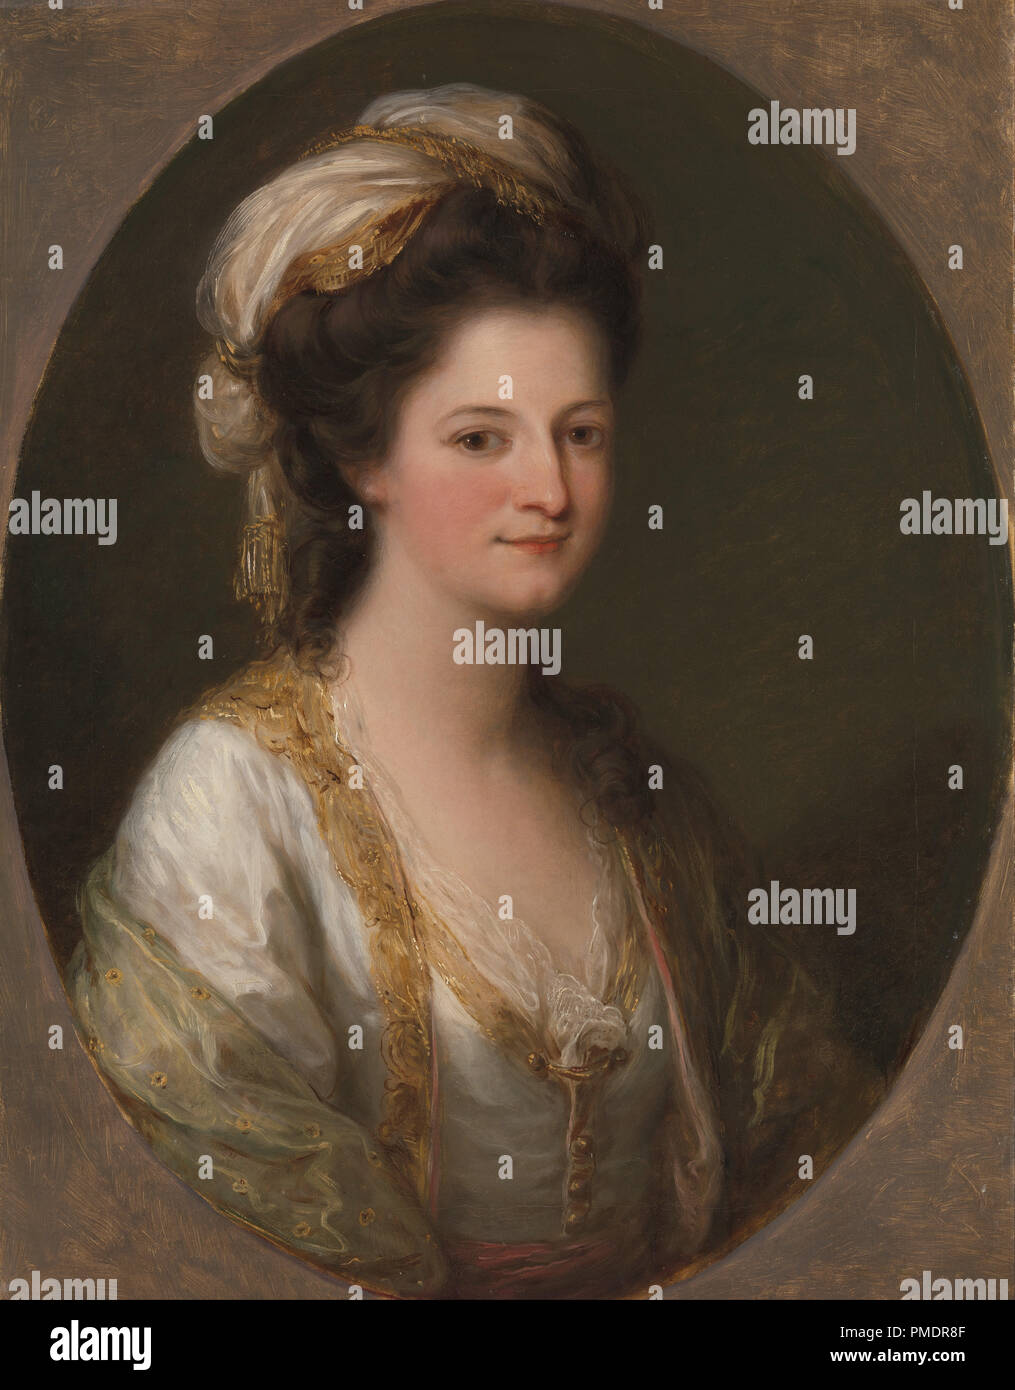 Portrait of a woman, traditionally identified as Lady Hervey. Date/Period: Ca. 1770. Painting. Oil on canvas. Height: 745 mm (29.33 in); Width: 581 mm (22.87 in). Author: Angelica Kauffman. Stock Photo